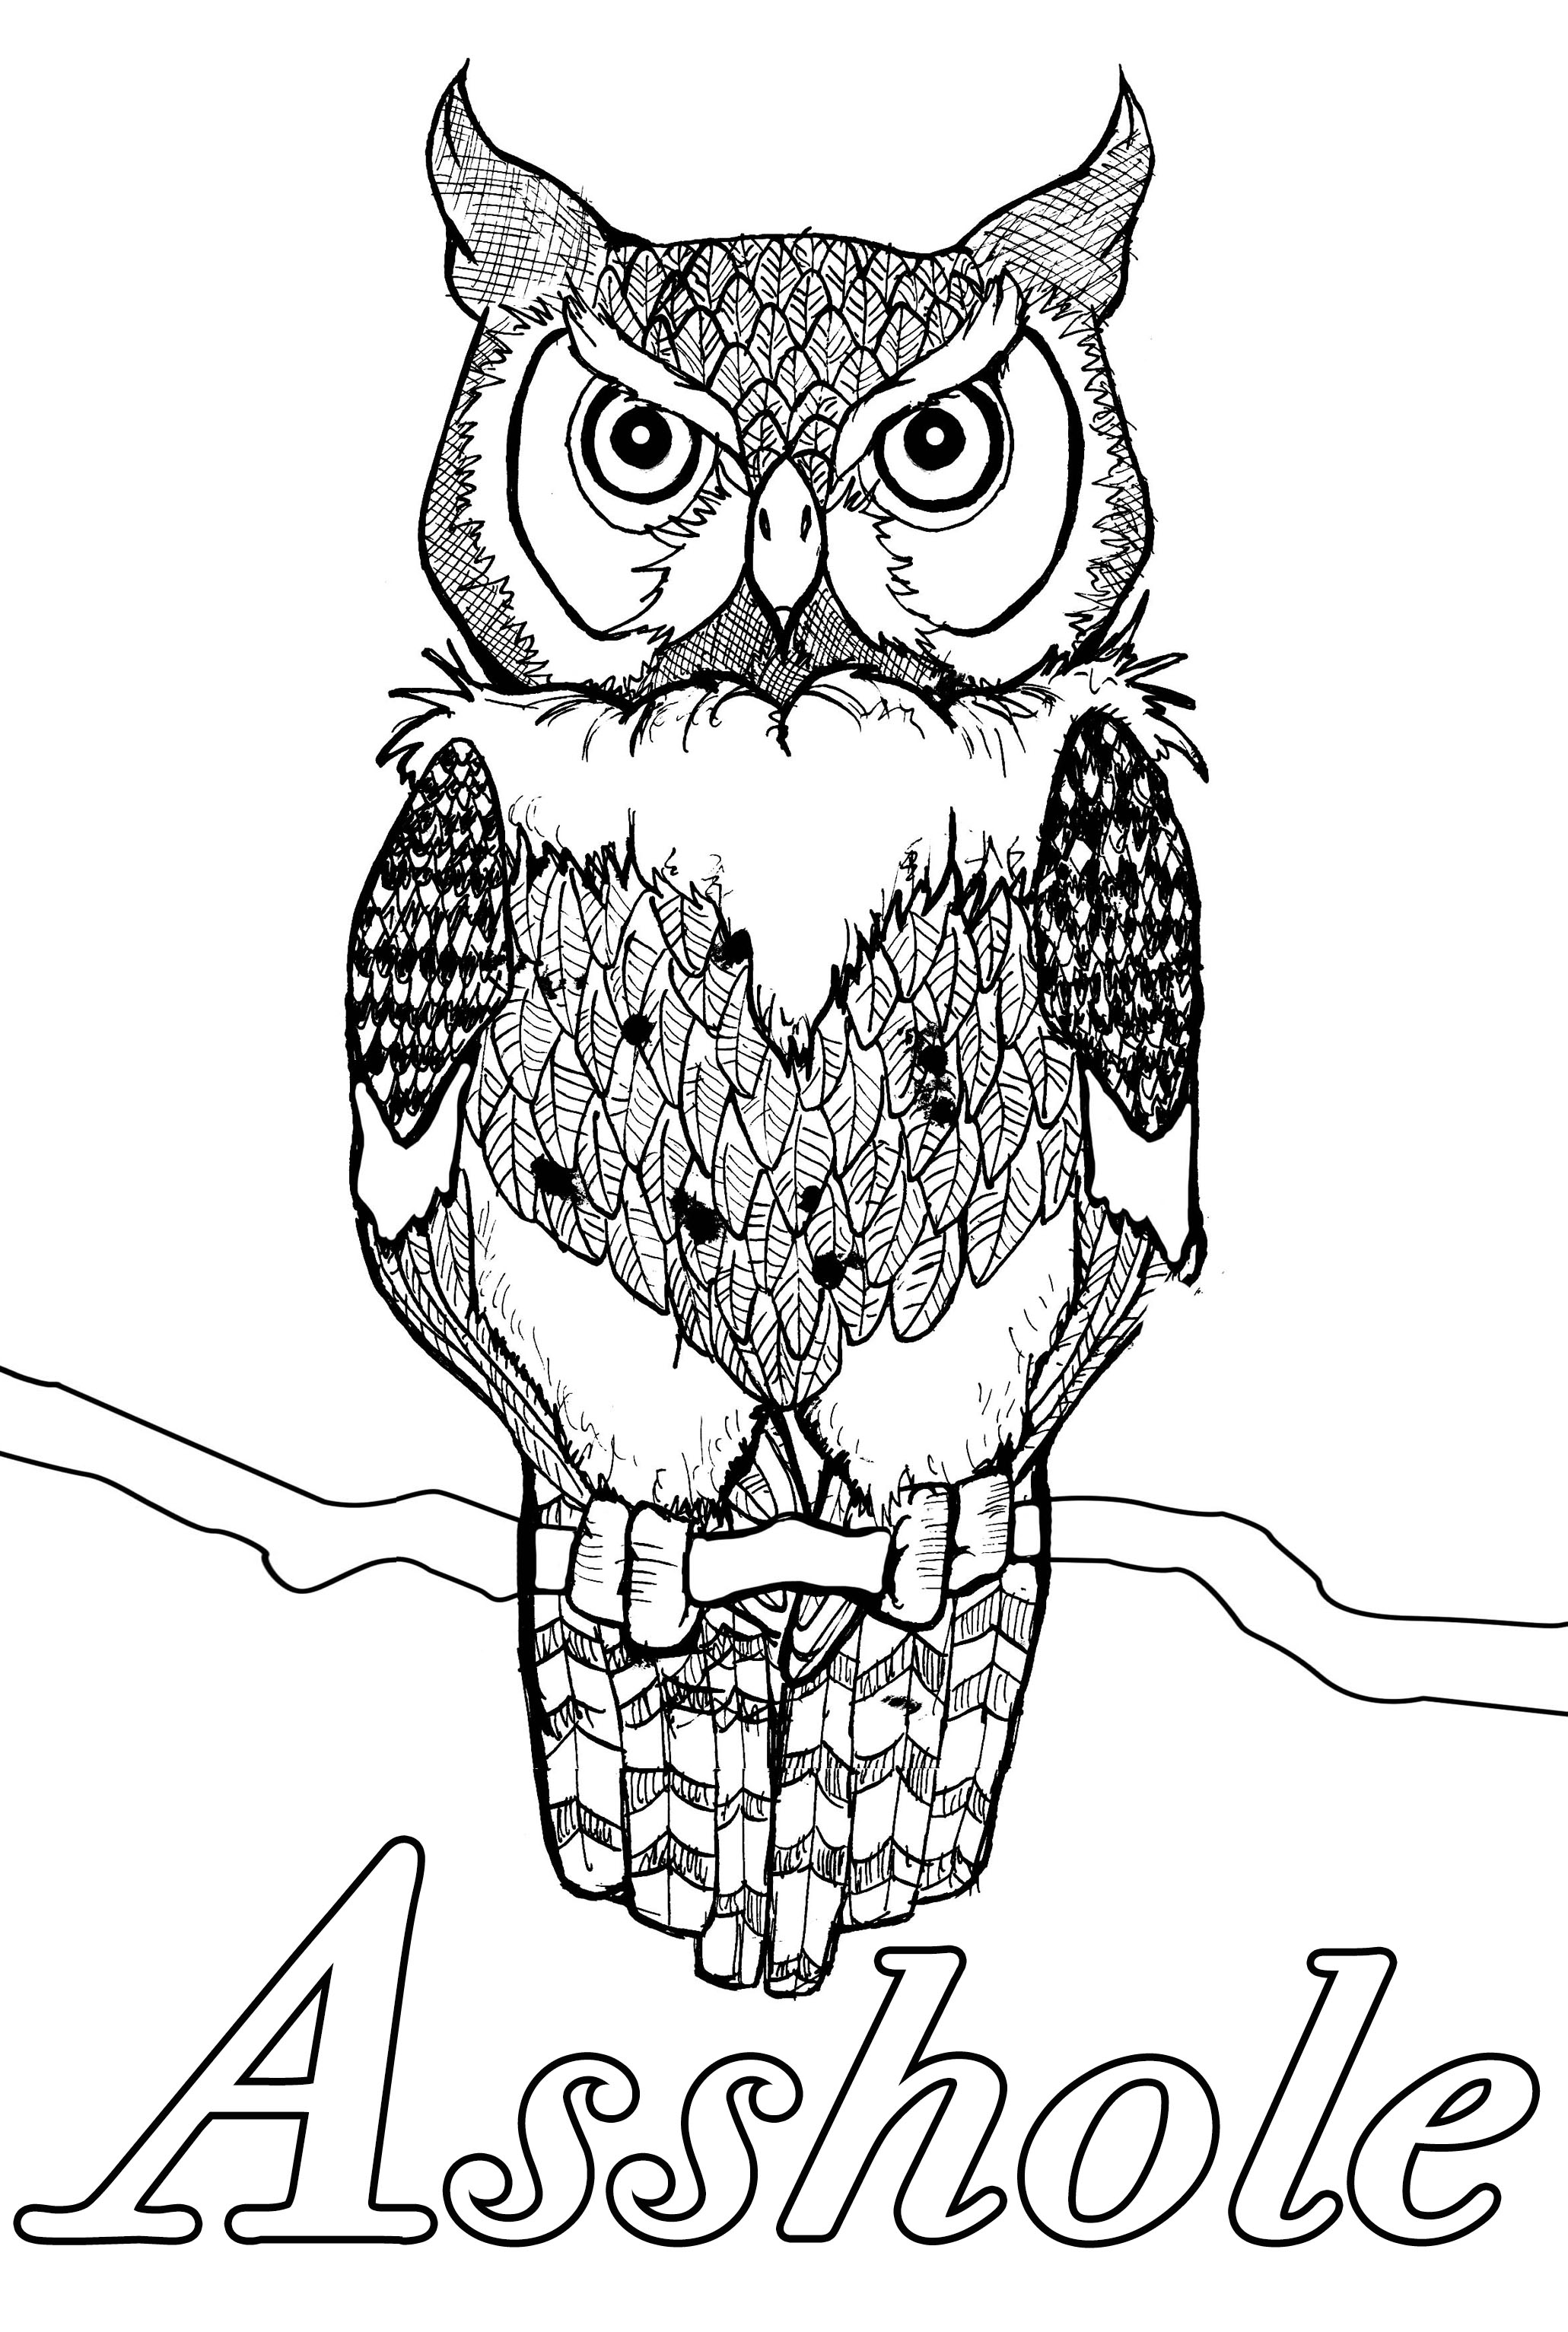 Asshole : Swear word coloring page with owl with a serious look